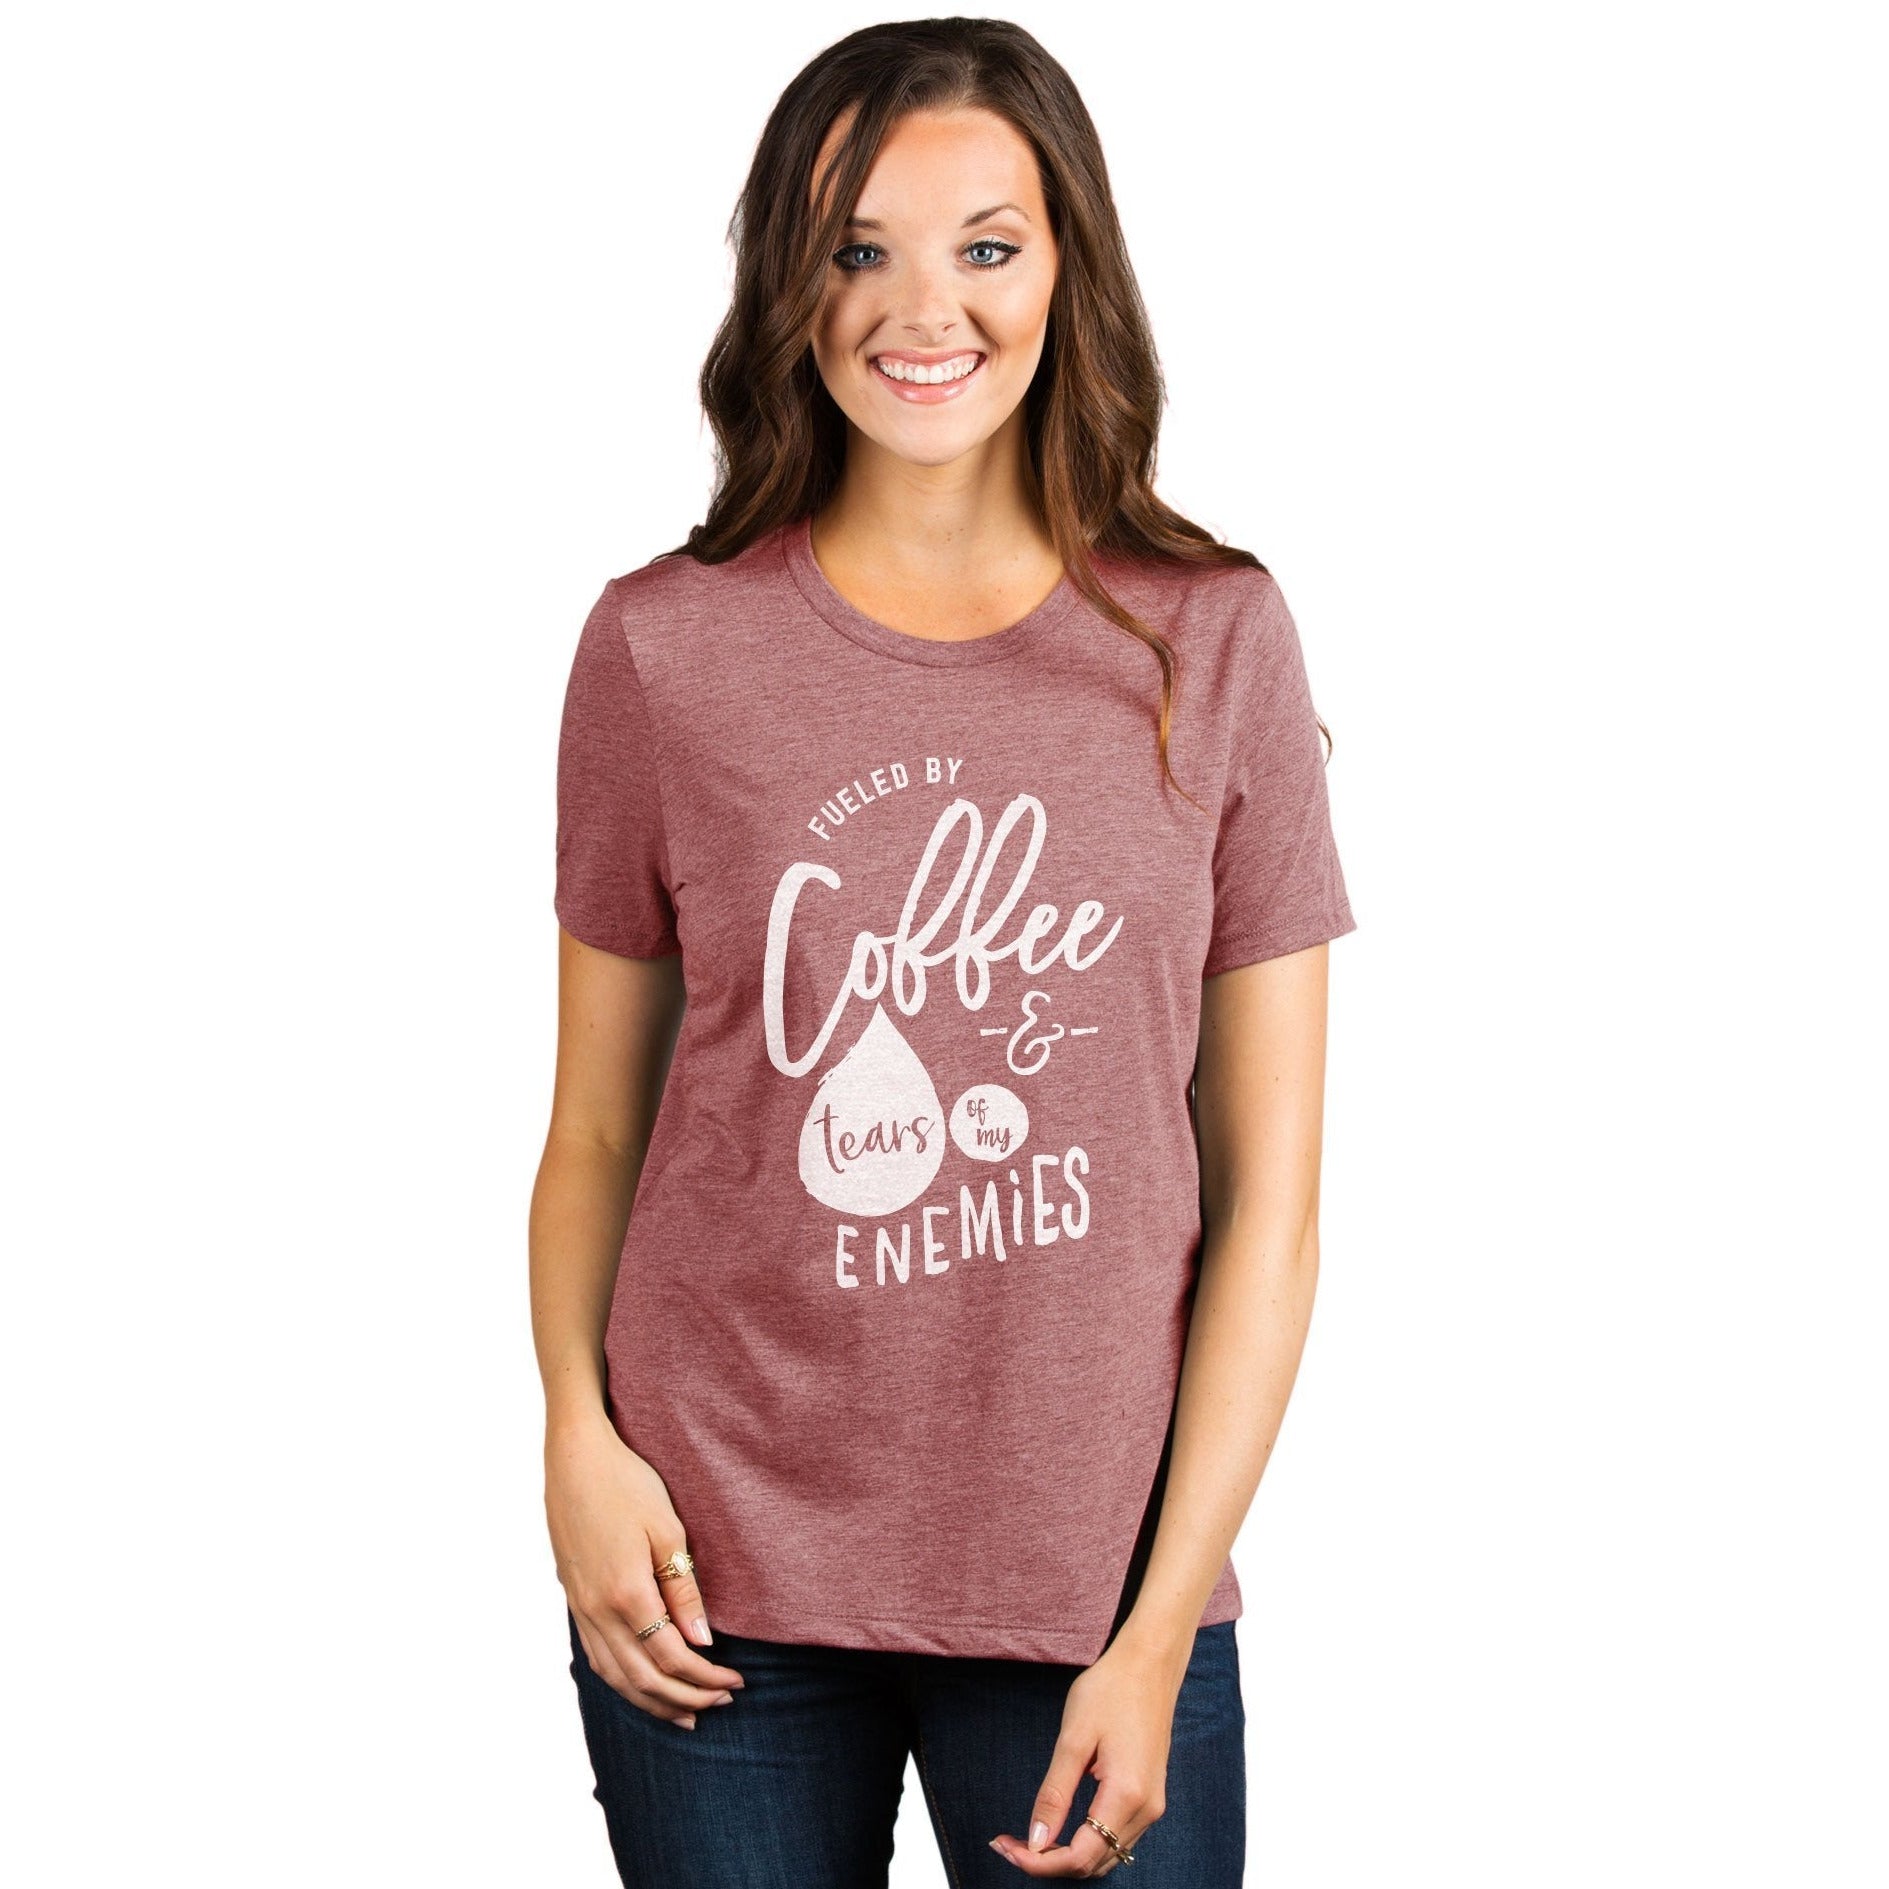 Fueled By Coffee And Tears Of My Enemies Women's Relaxed Crewneck T-Shirt Top Tee Heather Rouge Model
